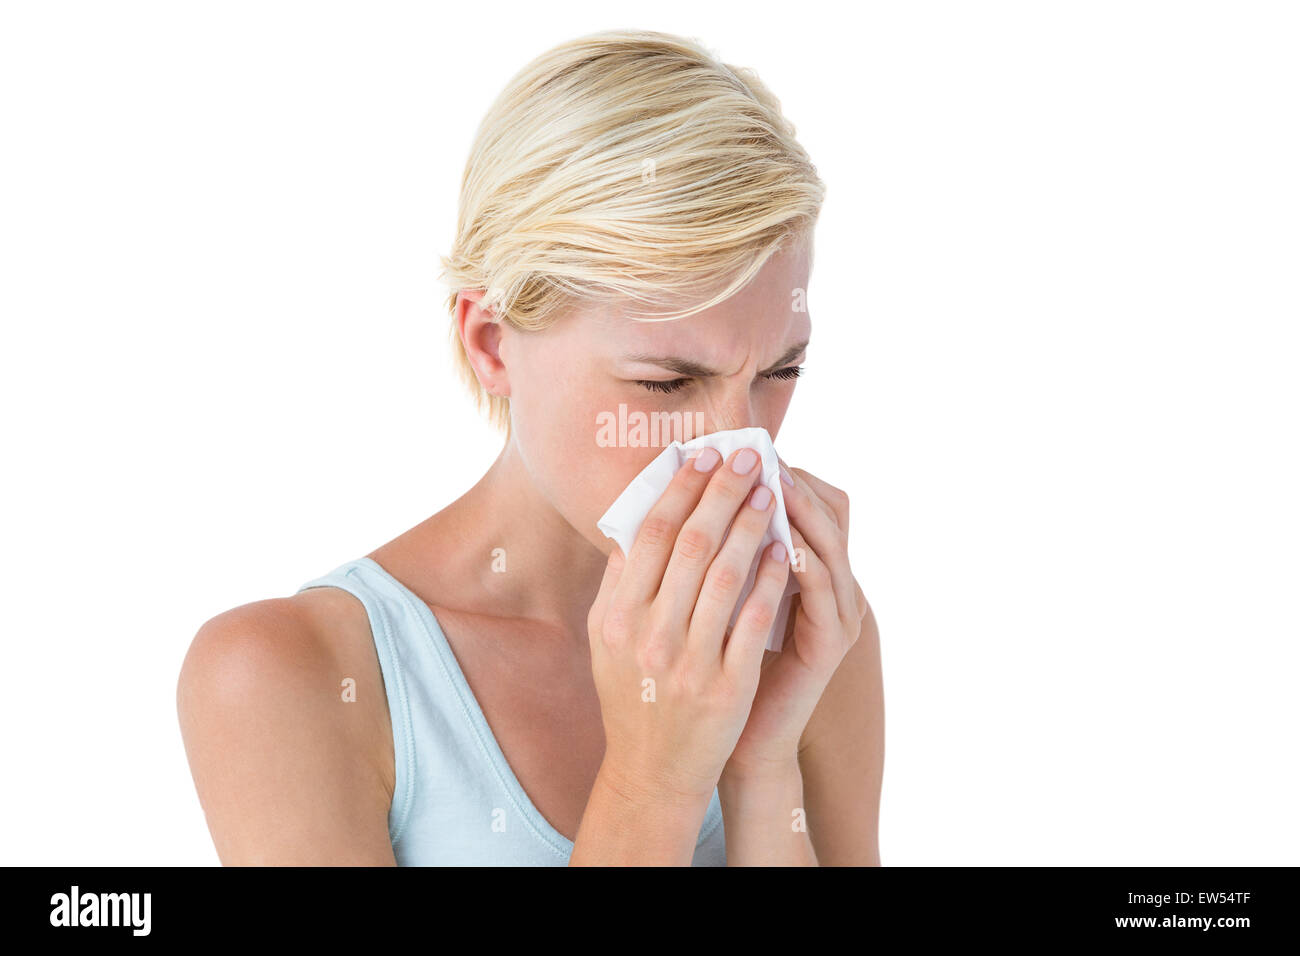 Attractive woman blowing her nose Stock Photo